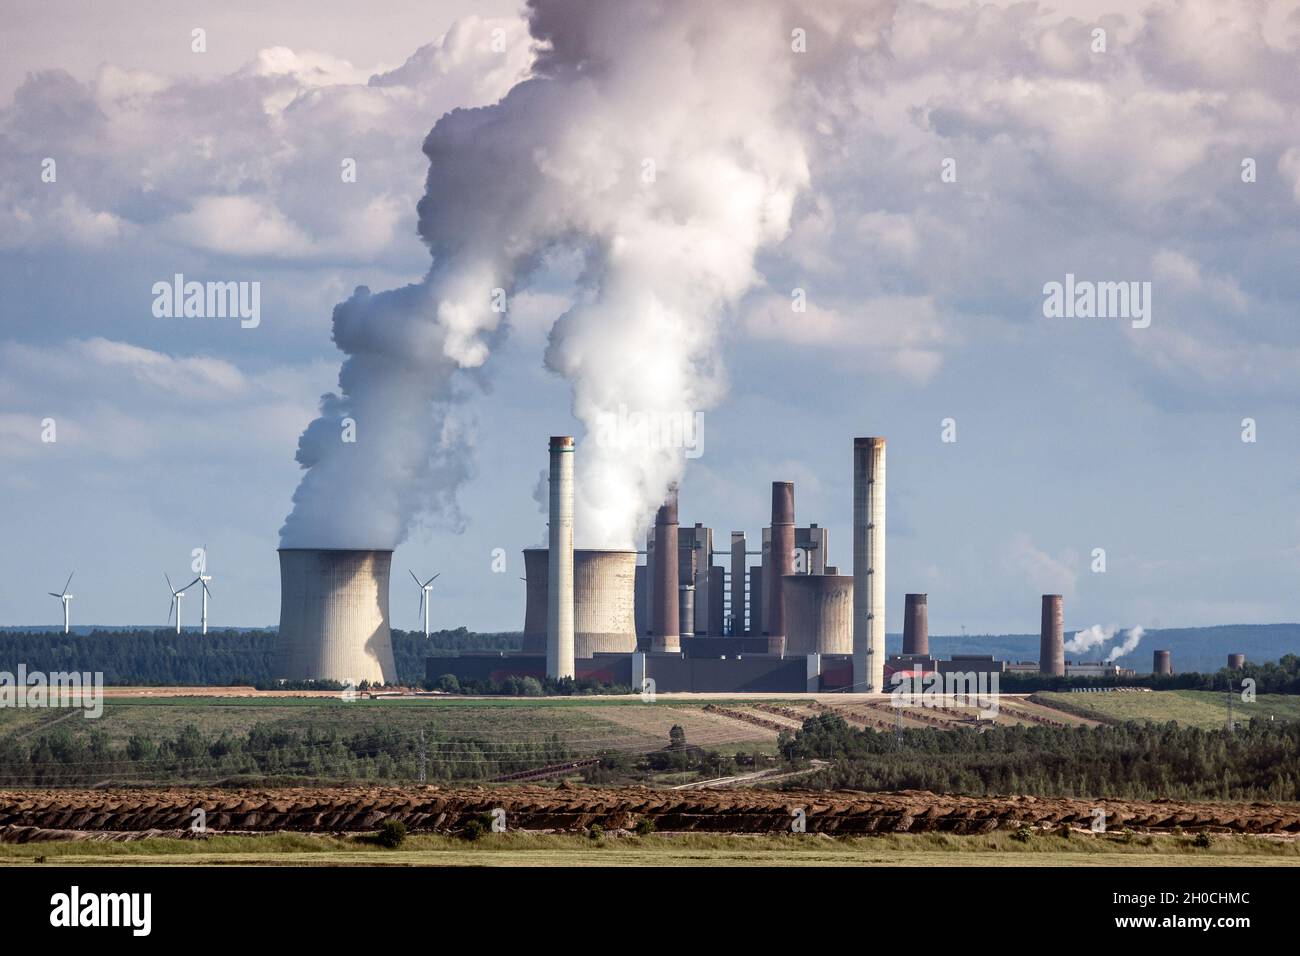 Power plant factory chimney emissions causing air pollution Stock Photo